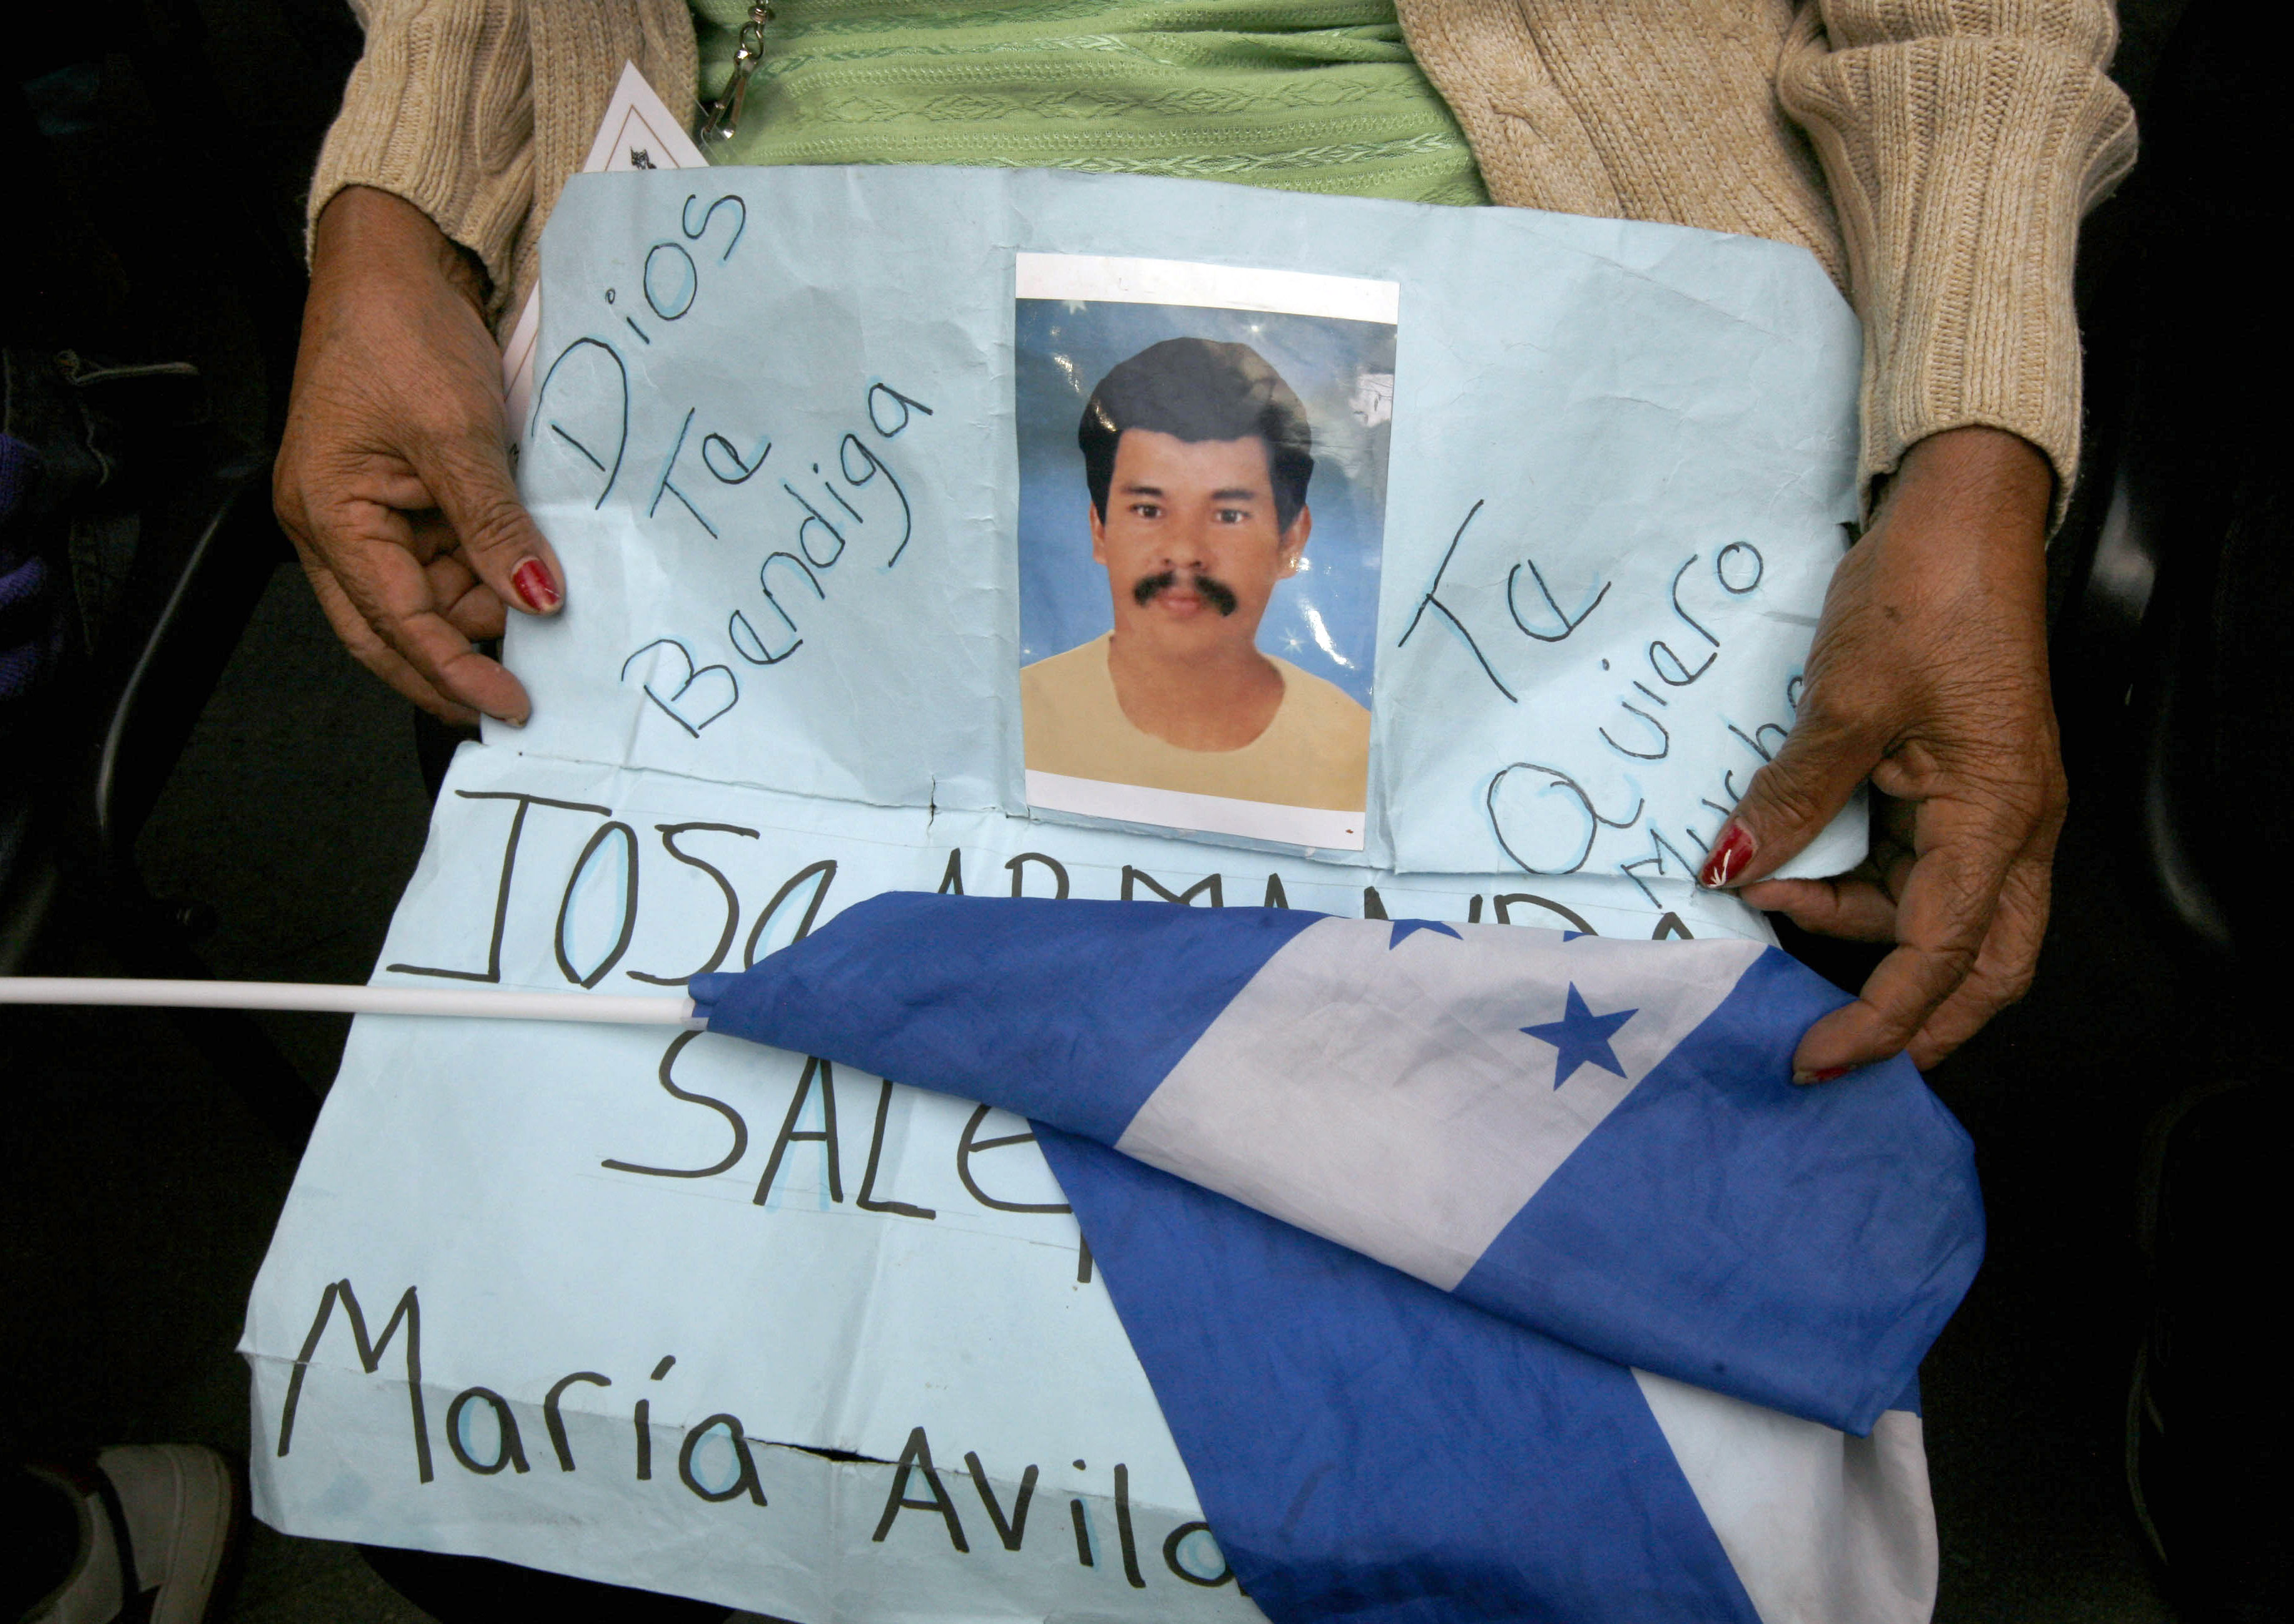 Migrant Maria Avila holds a sign with an image of his missing son, Jose Salgado Avila and a Honduran flag in Mexico City, Monday, Aug. 1, 2011. Hundreds of Central American relatives of dead or missing migrants traveled to Mexico CIty in an effort to pressure Mexican authorities to do more to guarantee the human rights of migrants traveling north towards the United States. (AP Photo/ Marco Ugarte)